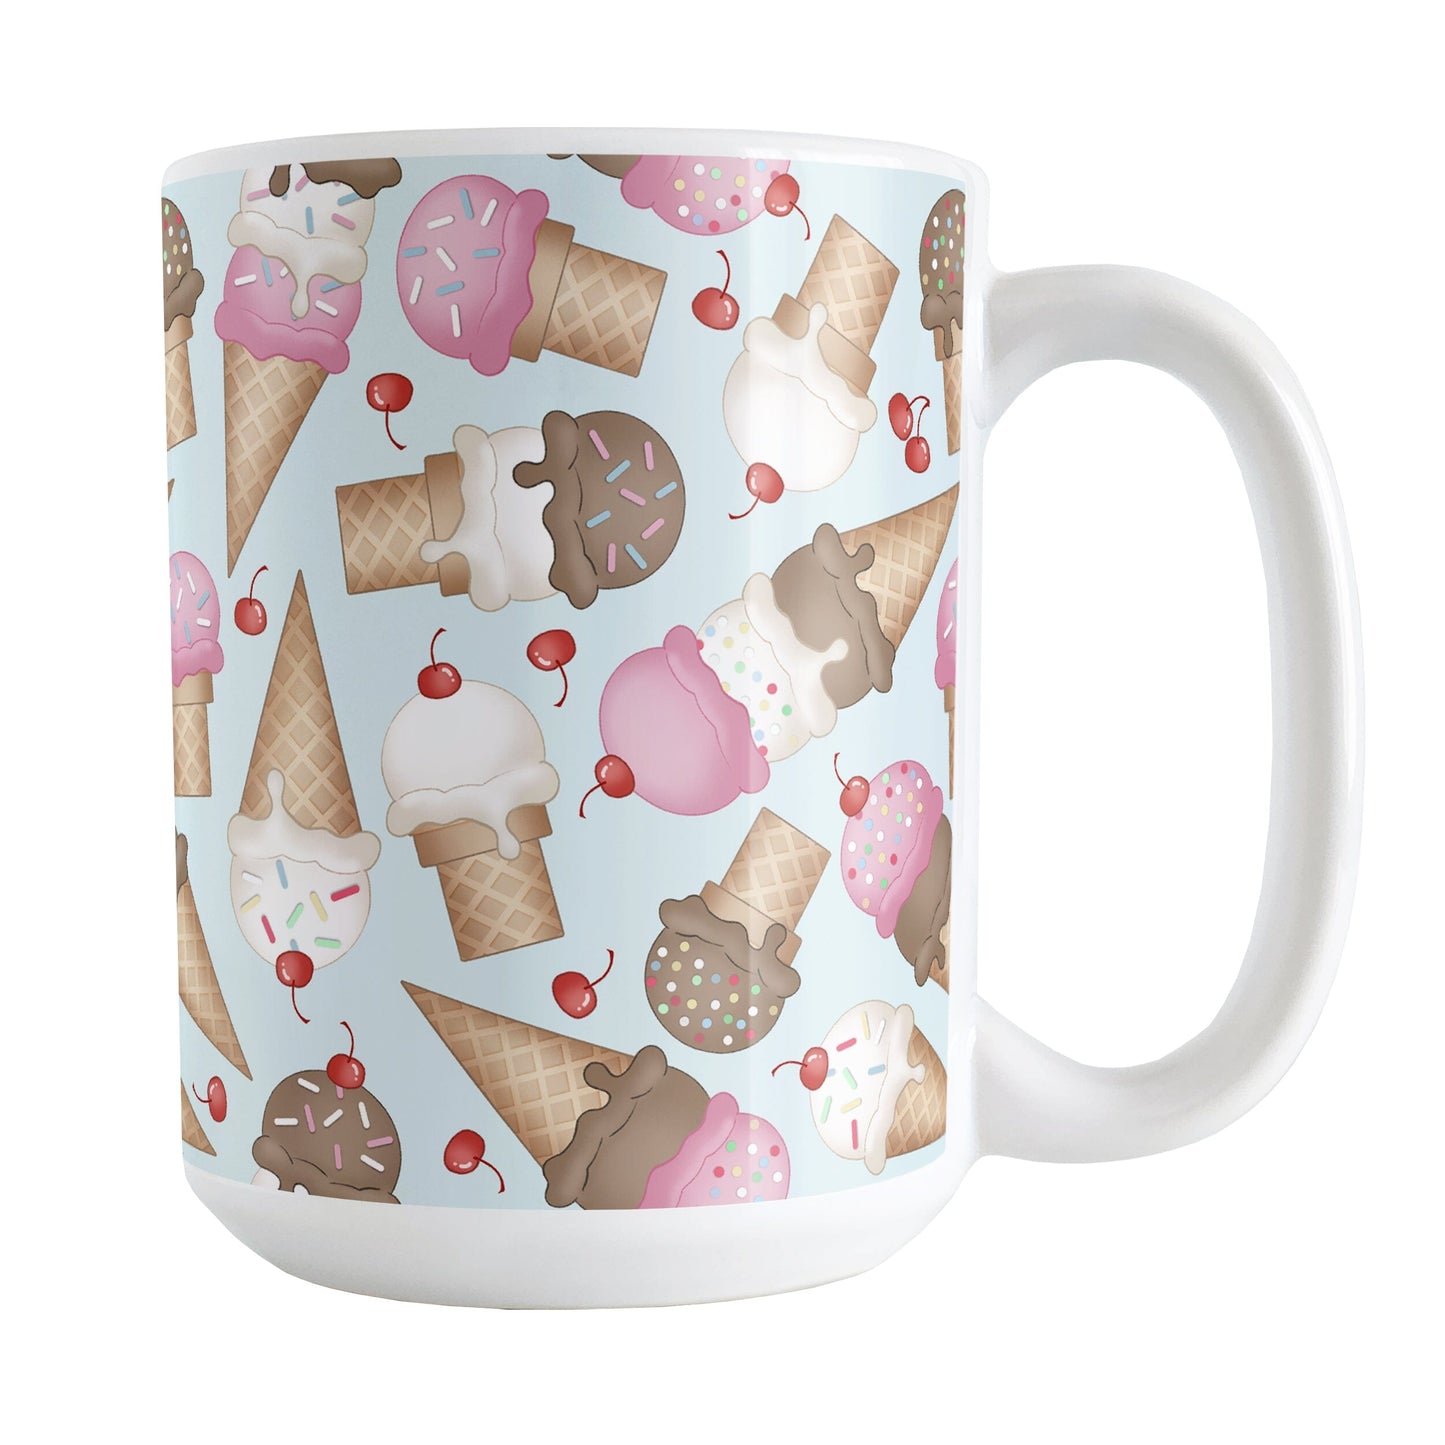 Ice Cream Cones Pattern Mug (15oz) at Amy's Coffee Mugs. A ceramic coffee mug printed with a design of hand-drawn ice cream cones with chocolate, strawberry, and vanilla scoops, with sprinkles and cherries, over a pale blue color, in a pattern that wraps around the mug to the handle.